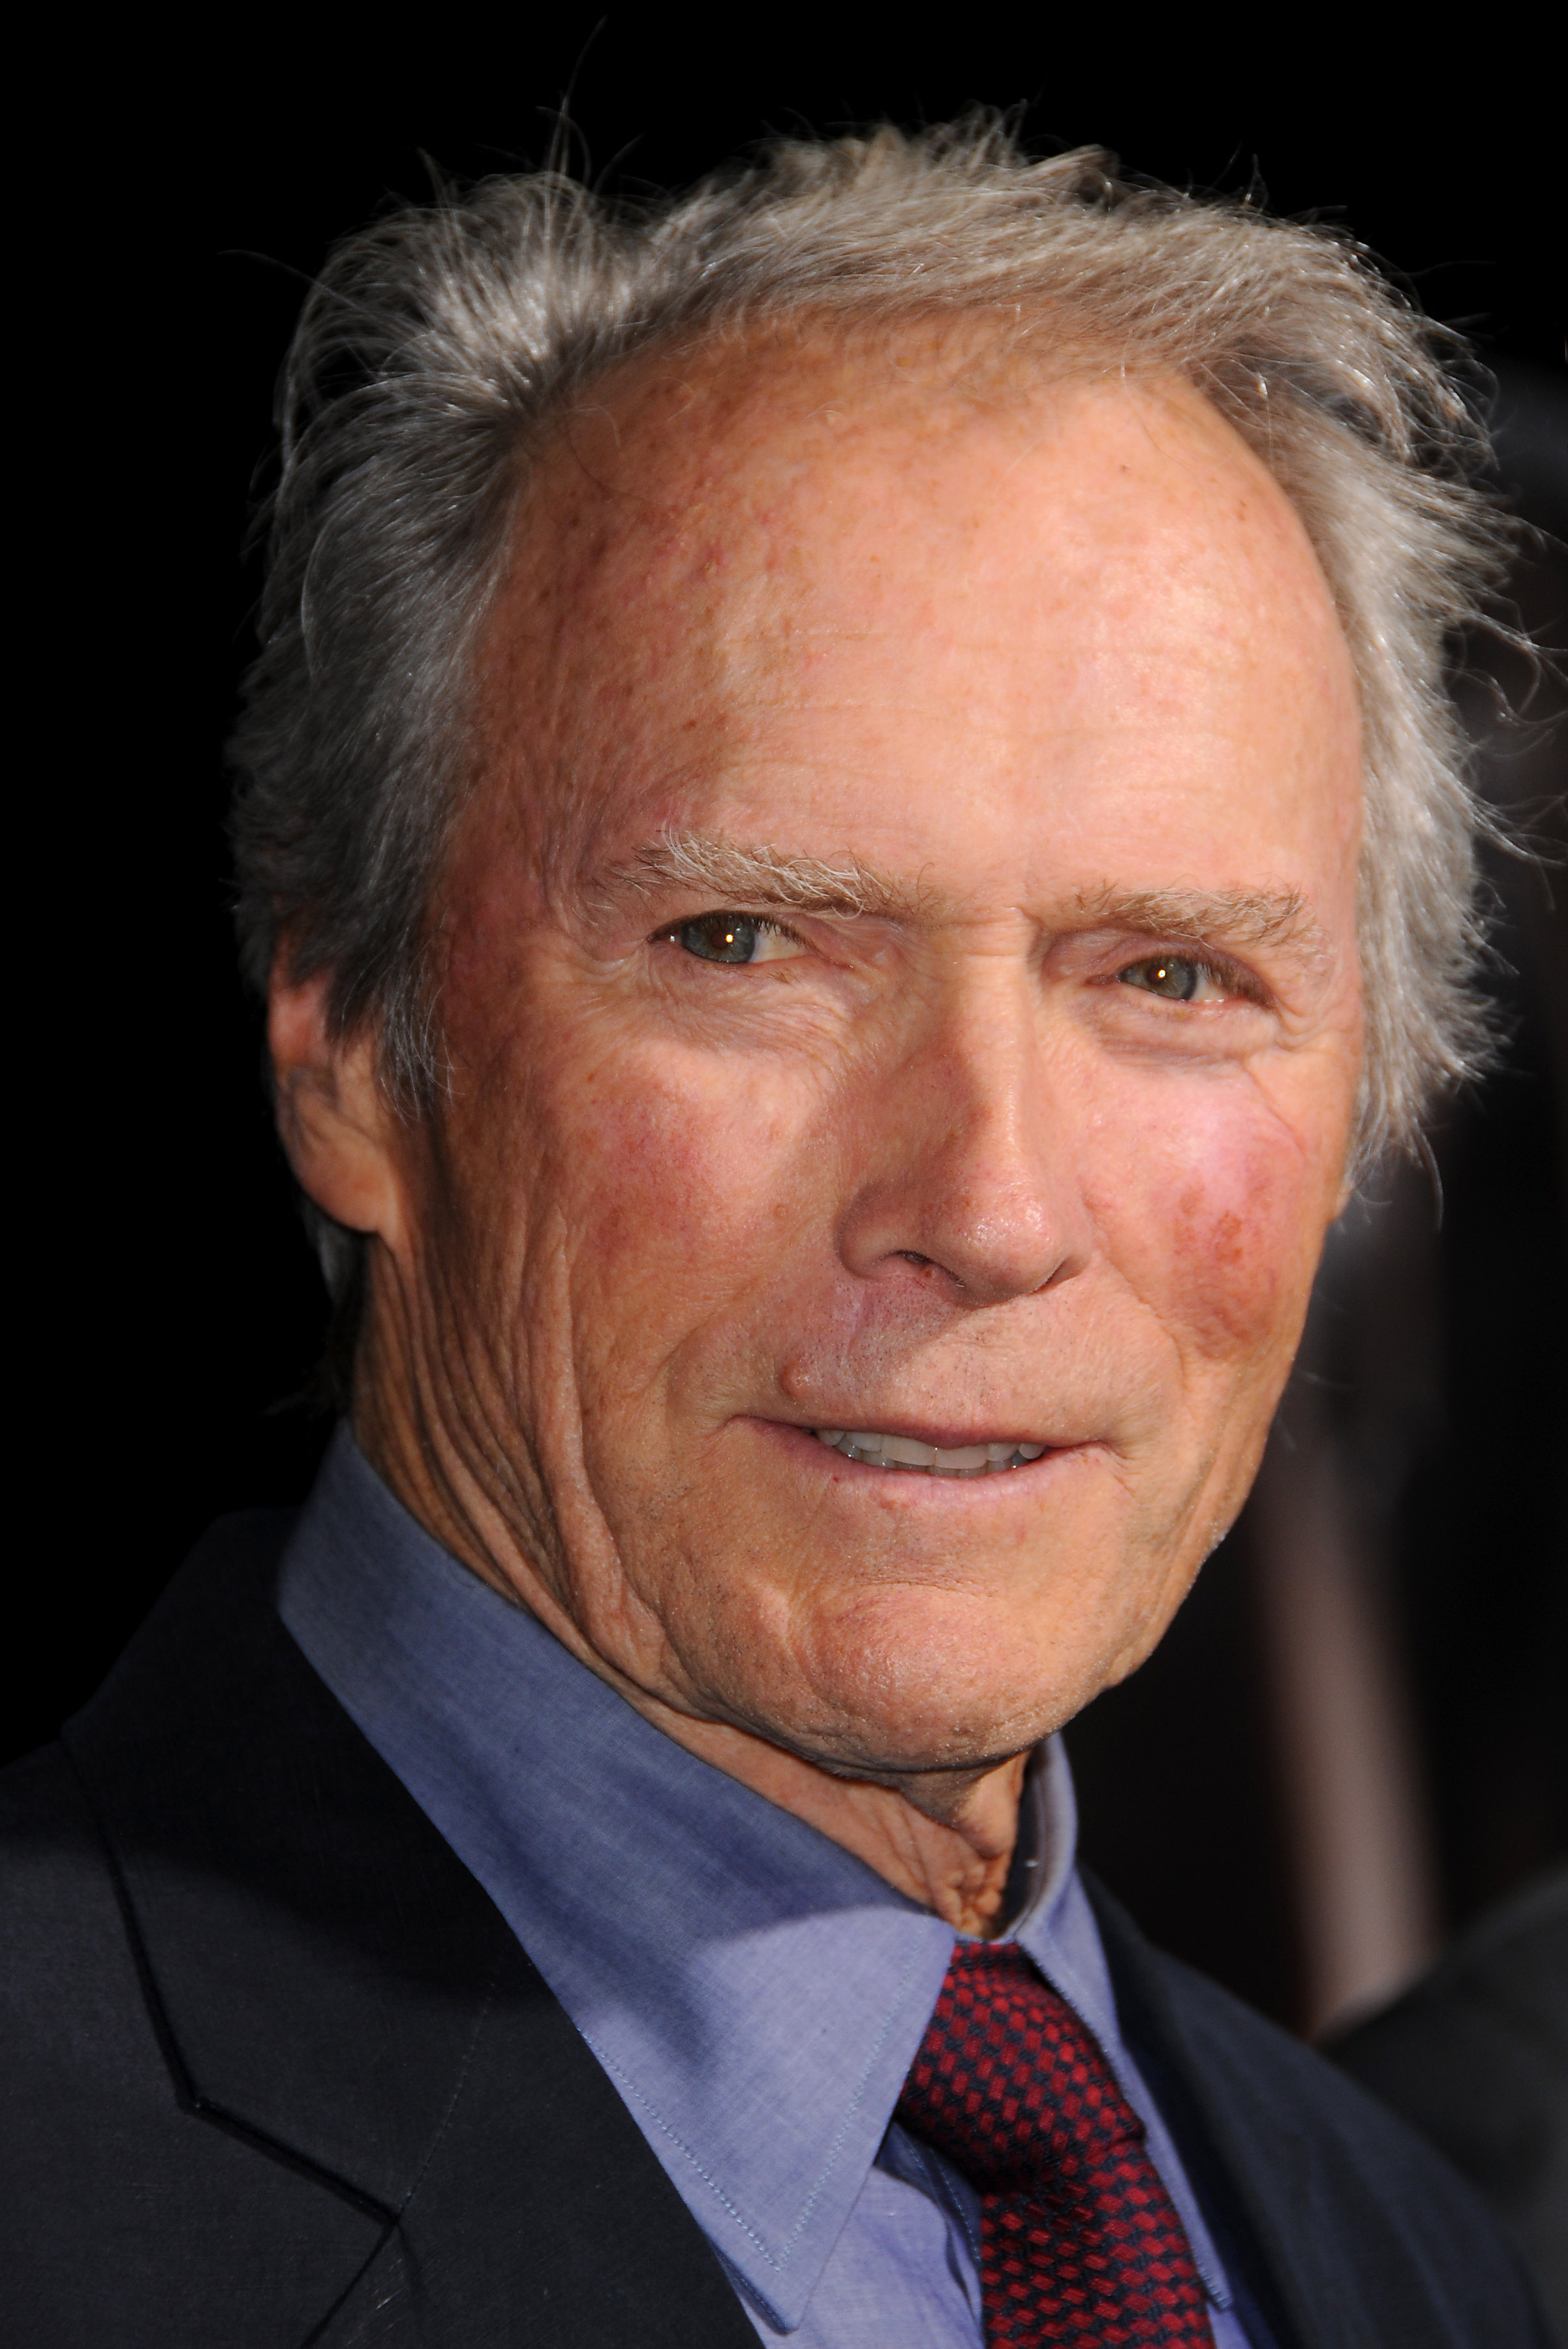 Clint Eastwood Net Worth 2020 Update Bio, Age, Height, Weight